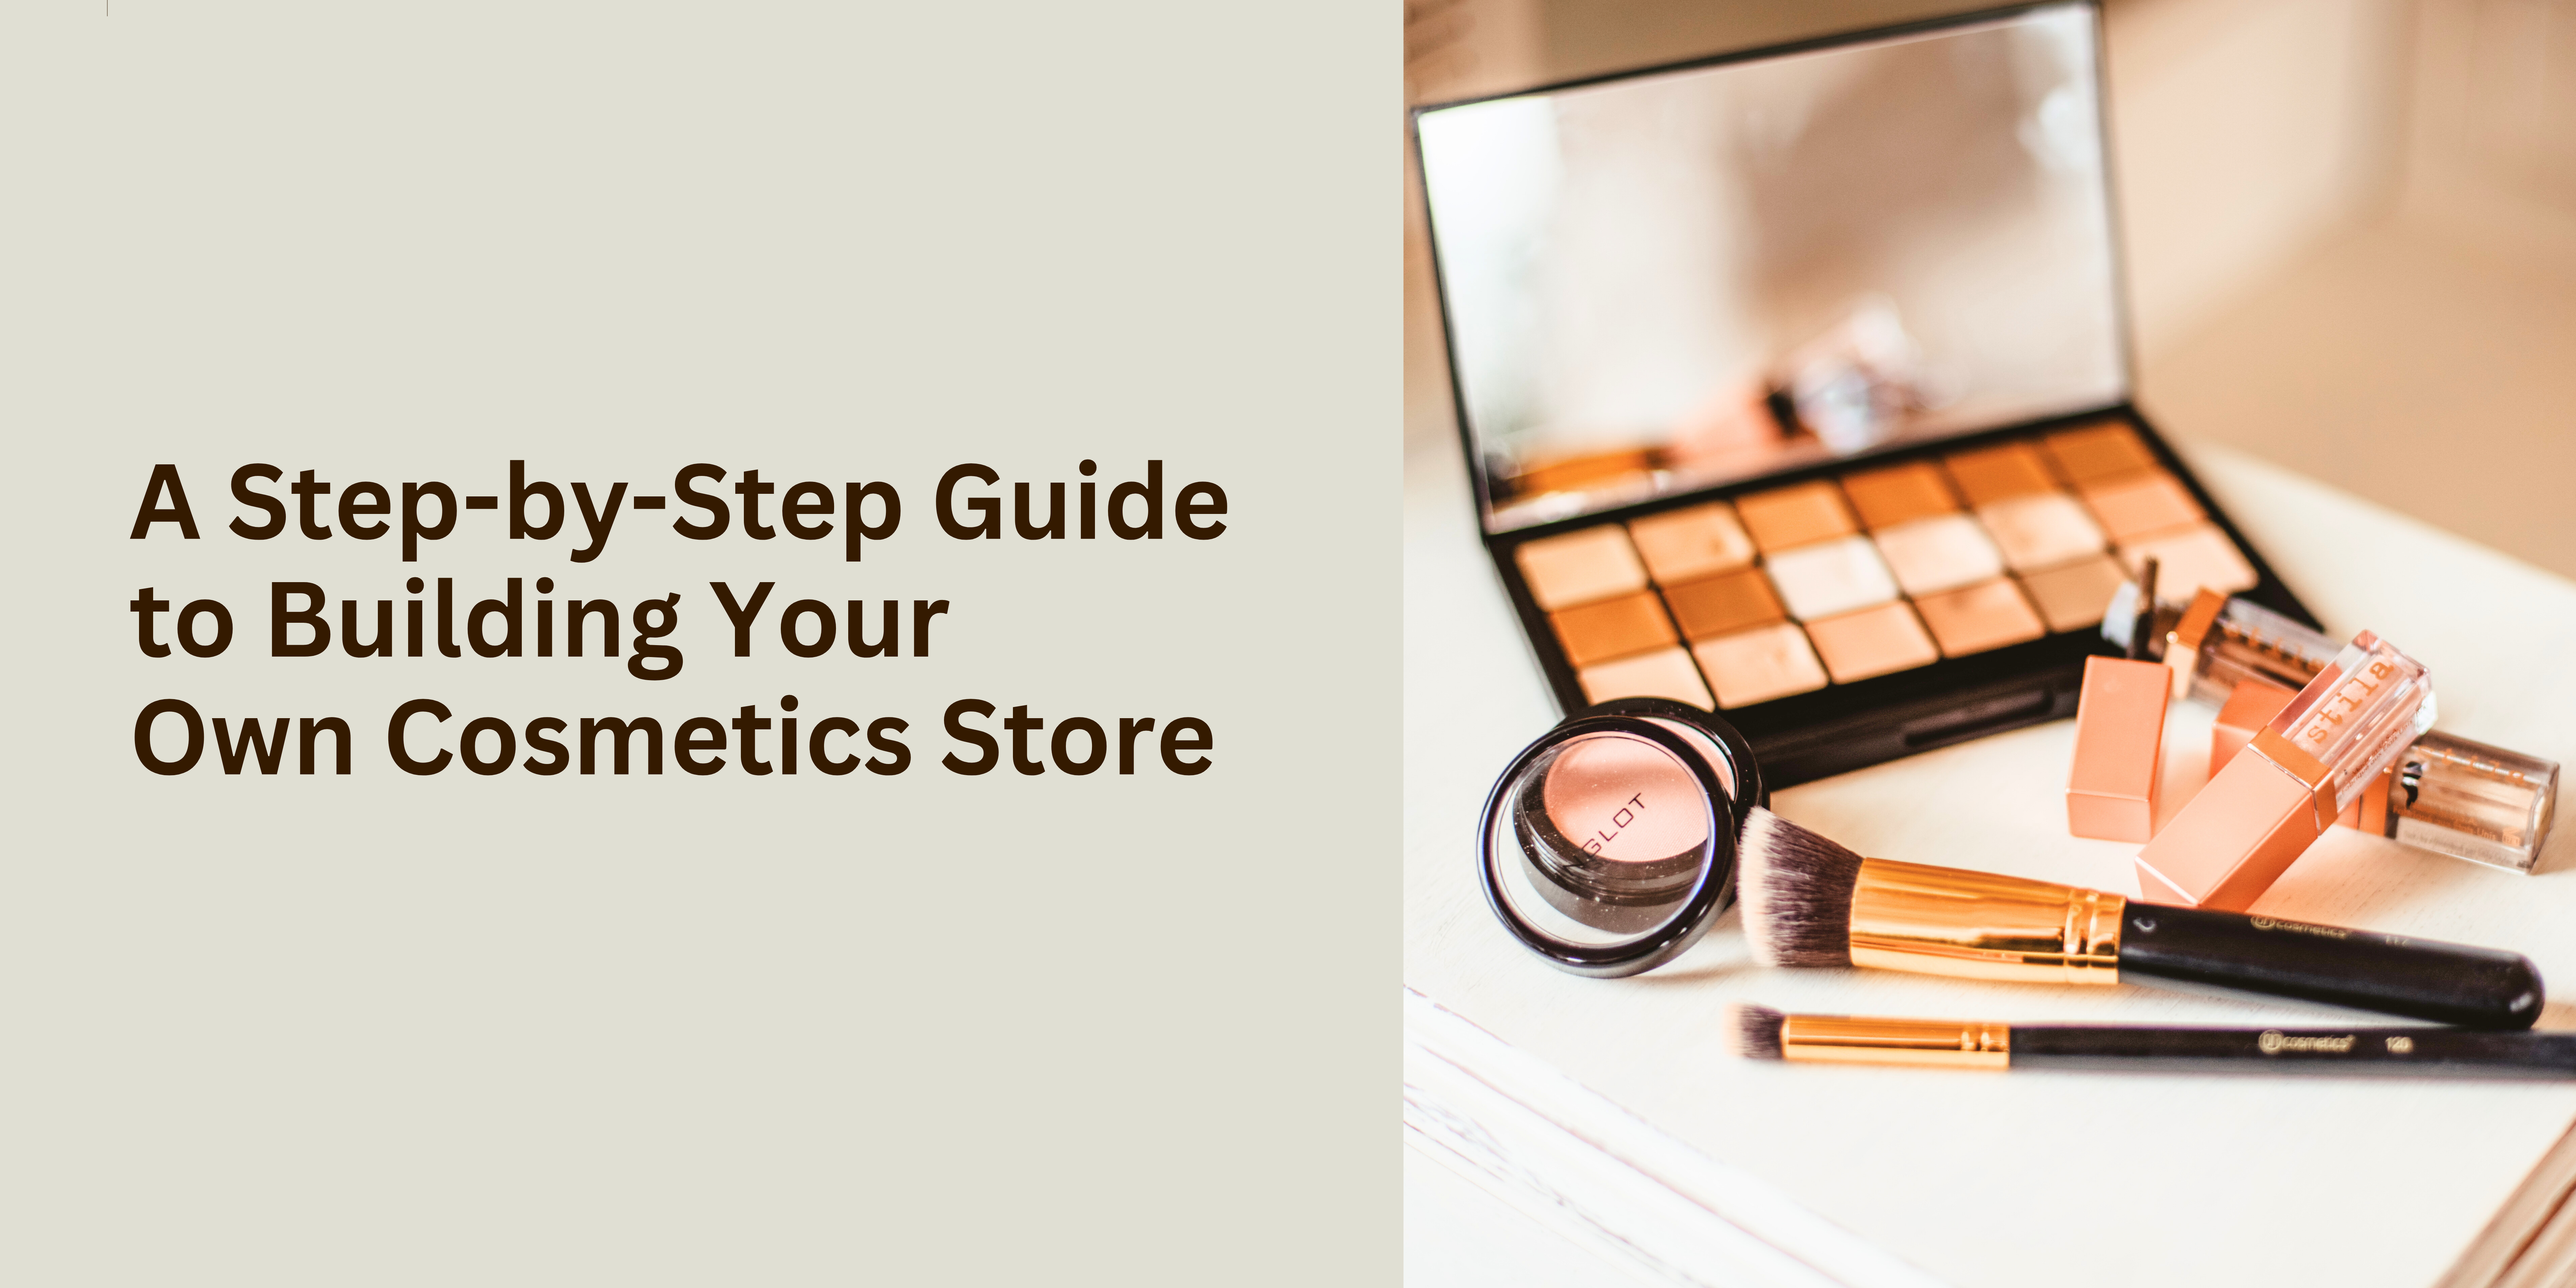 A Step-by-Step Guide to Building Your Own Cosmetics Store